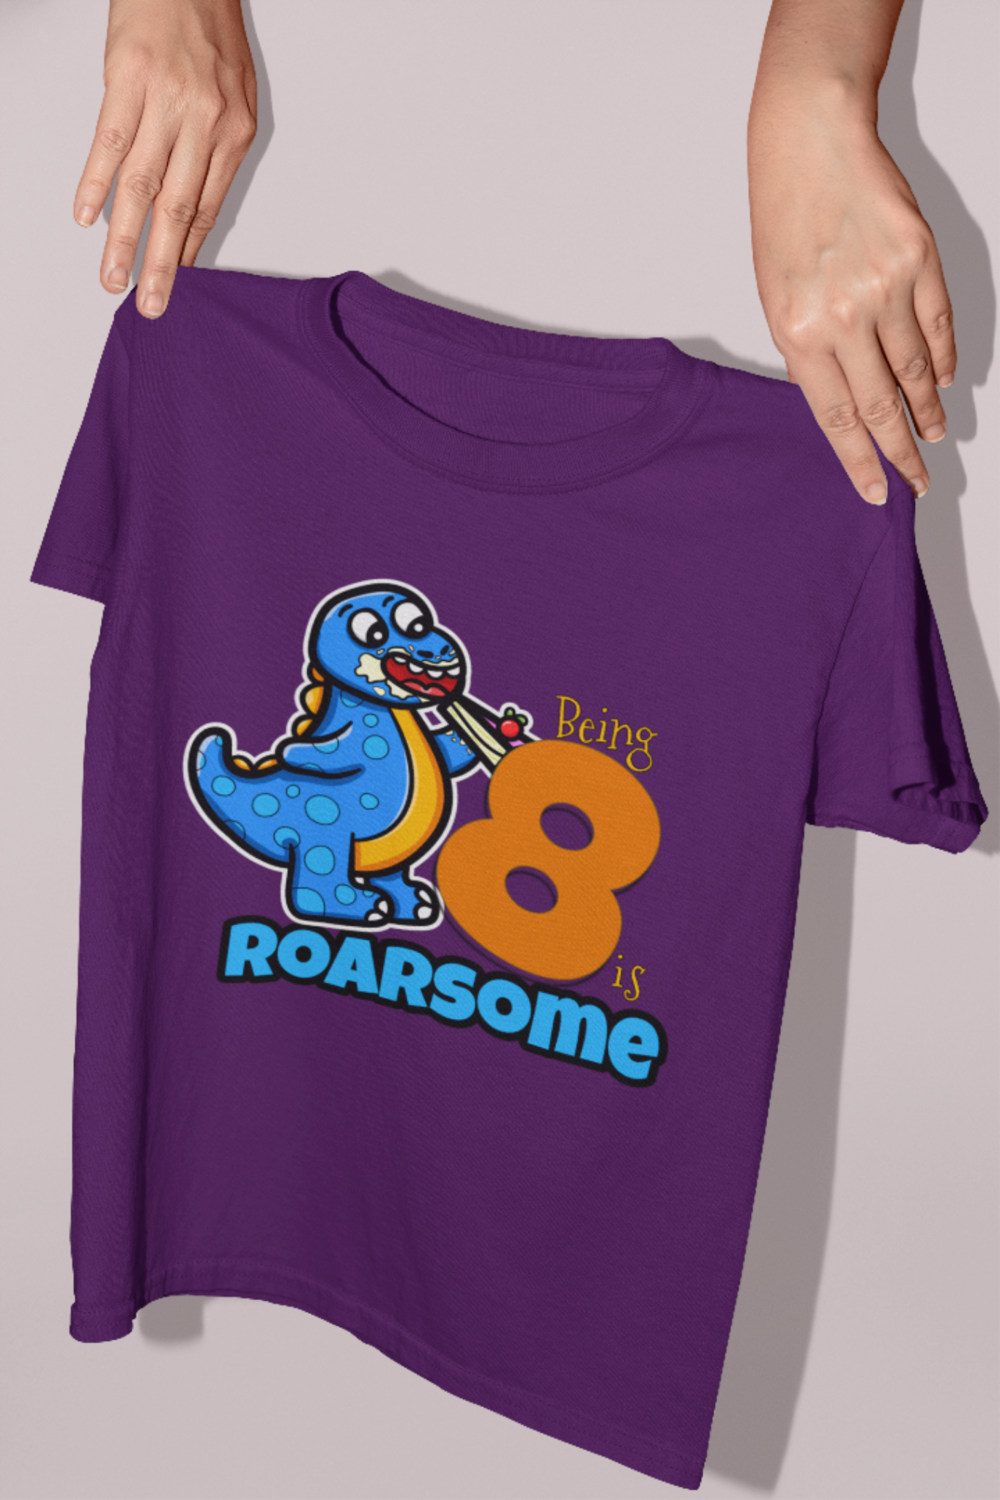 Customised Birthday T-shirts for Boys - Dinosaur tshirts for boys. Personalise tshirt - 'BEING (age) IS ROARSOME